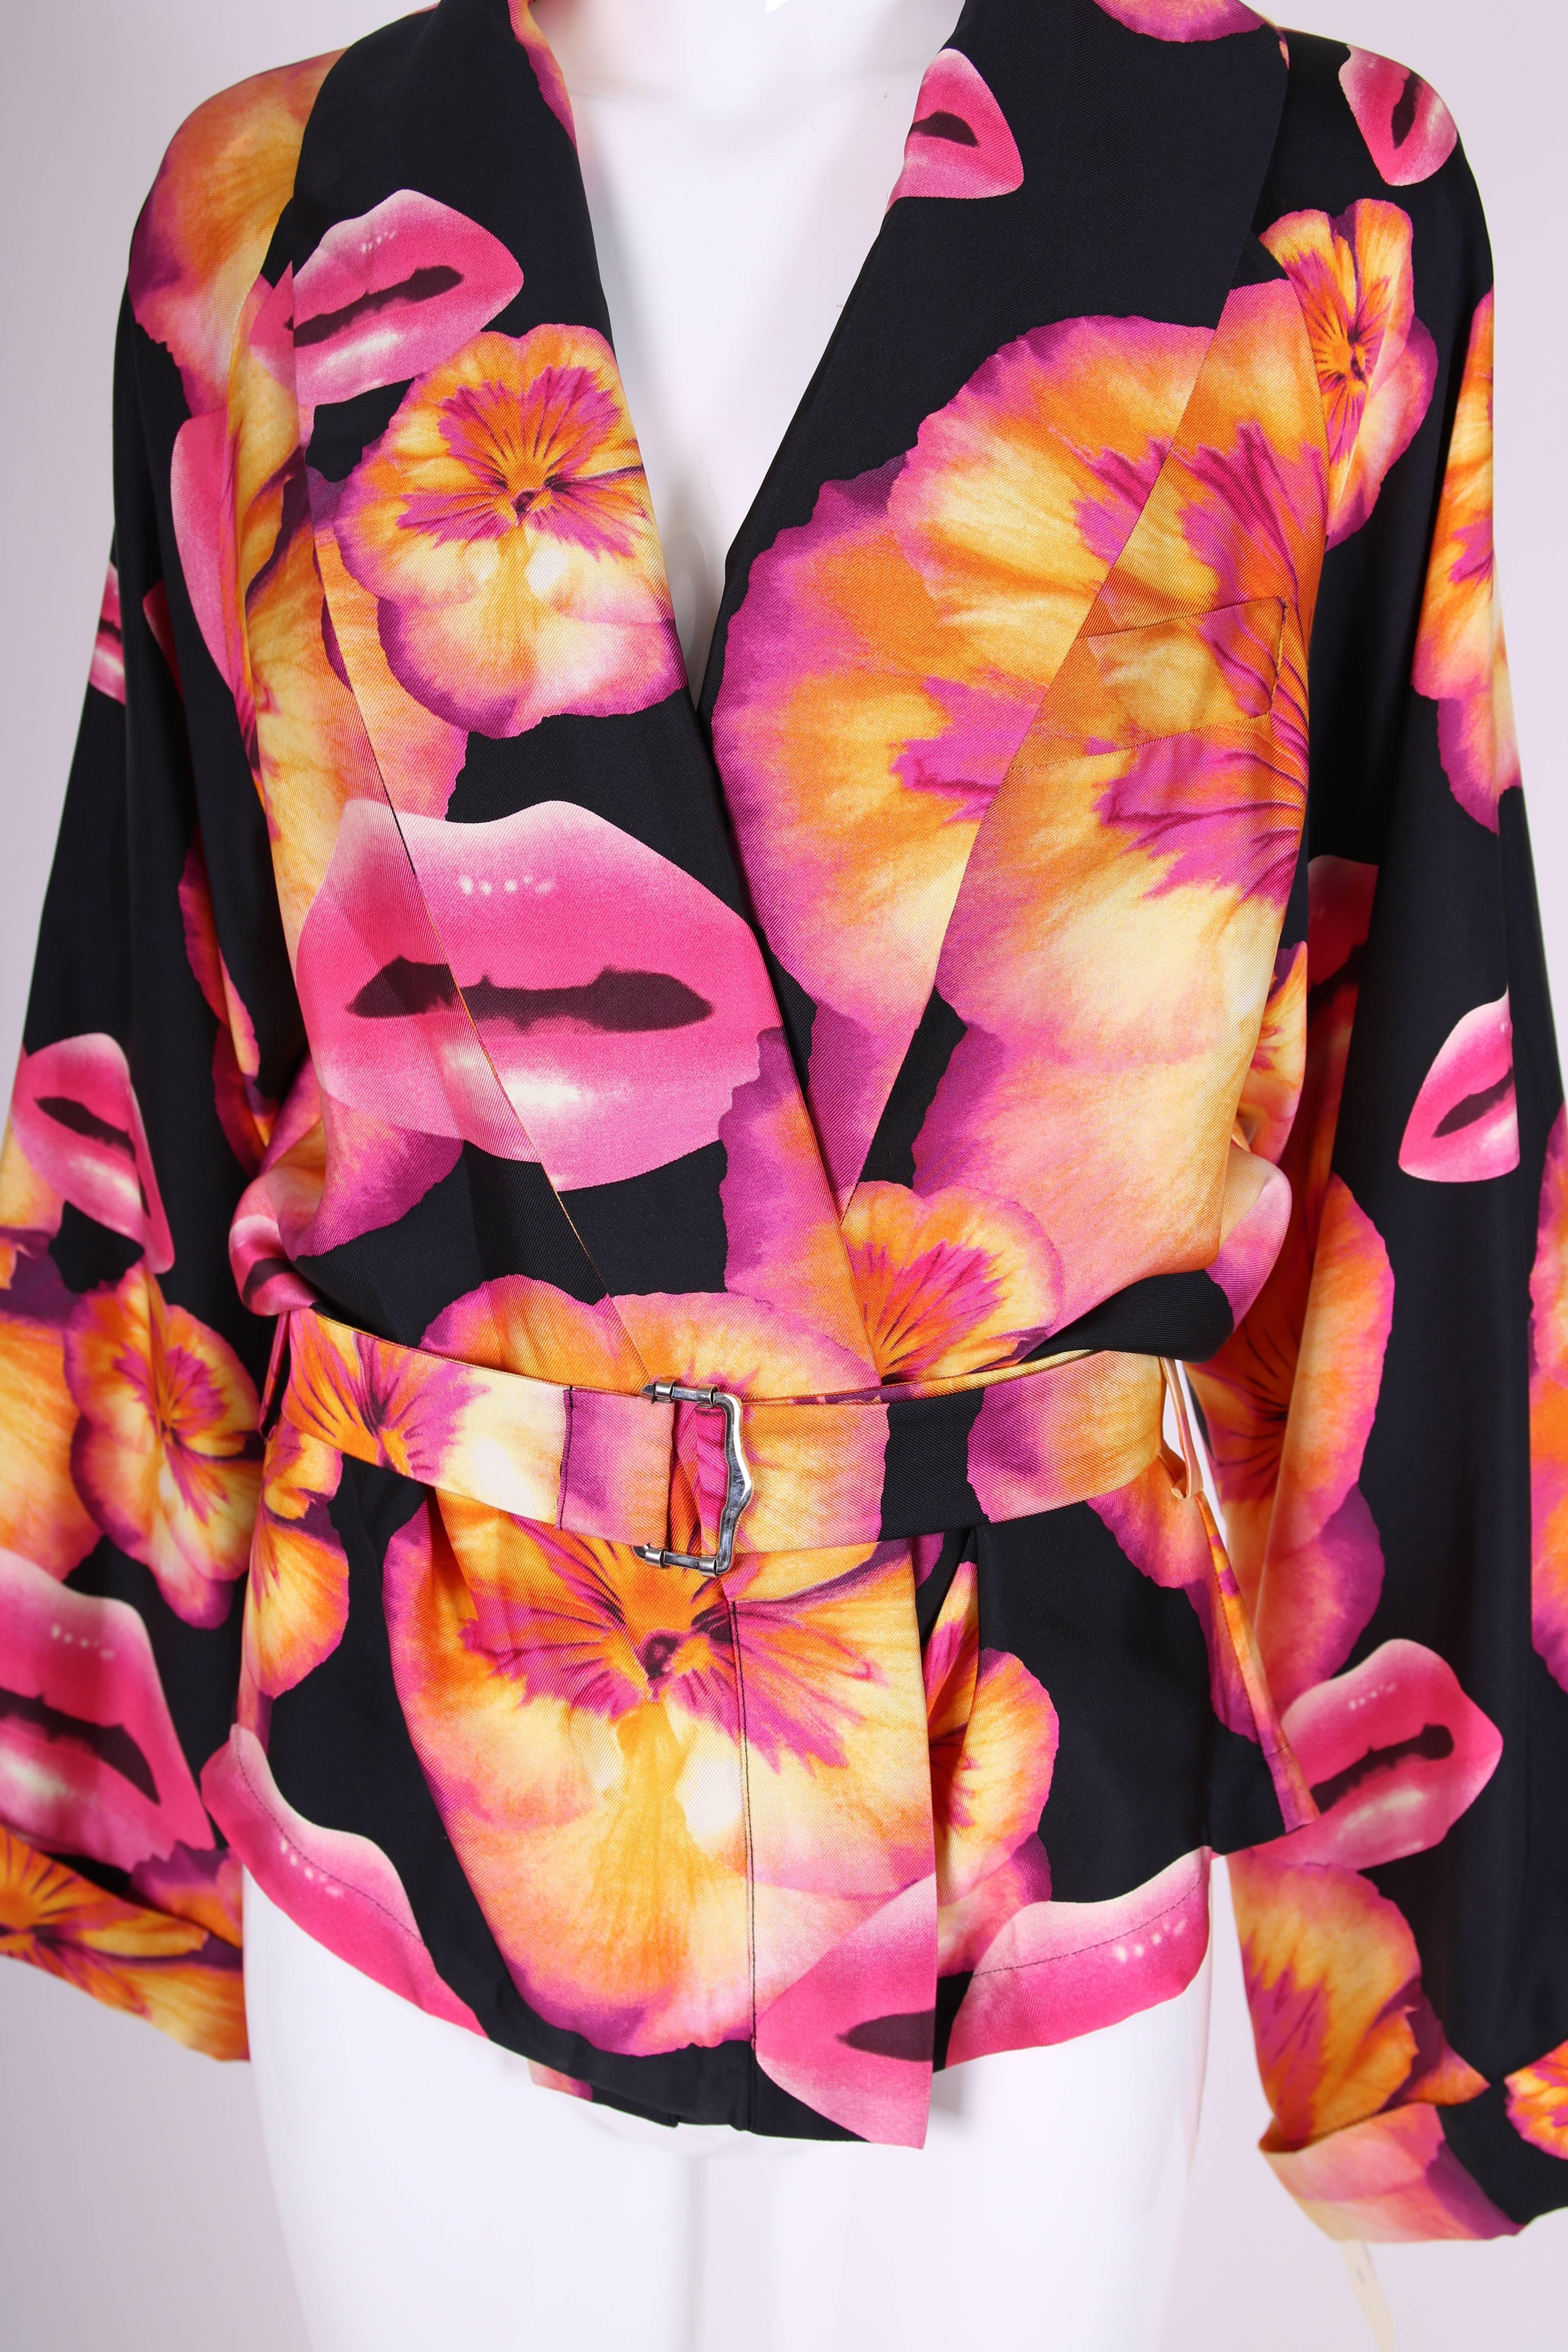 Christian Dior by Joh Galliano Silk Lip & Flower Print Kimono Style Top Jacket In Excellent Condition In Studio City, CA